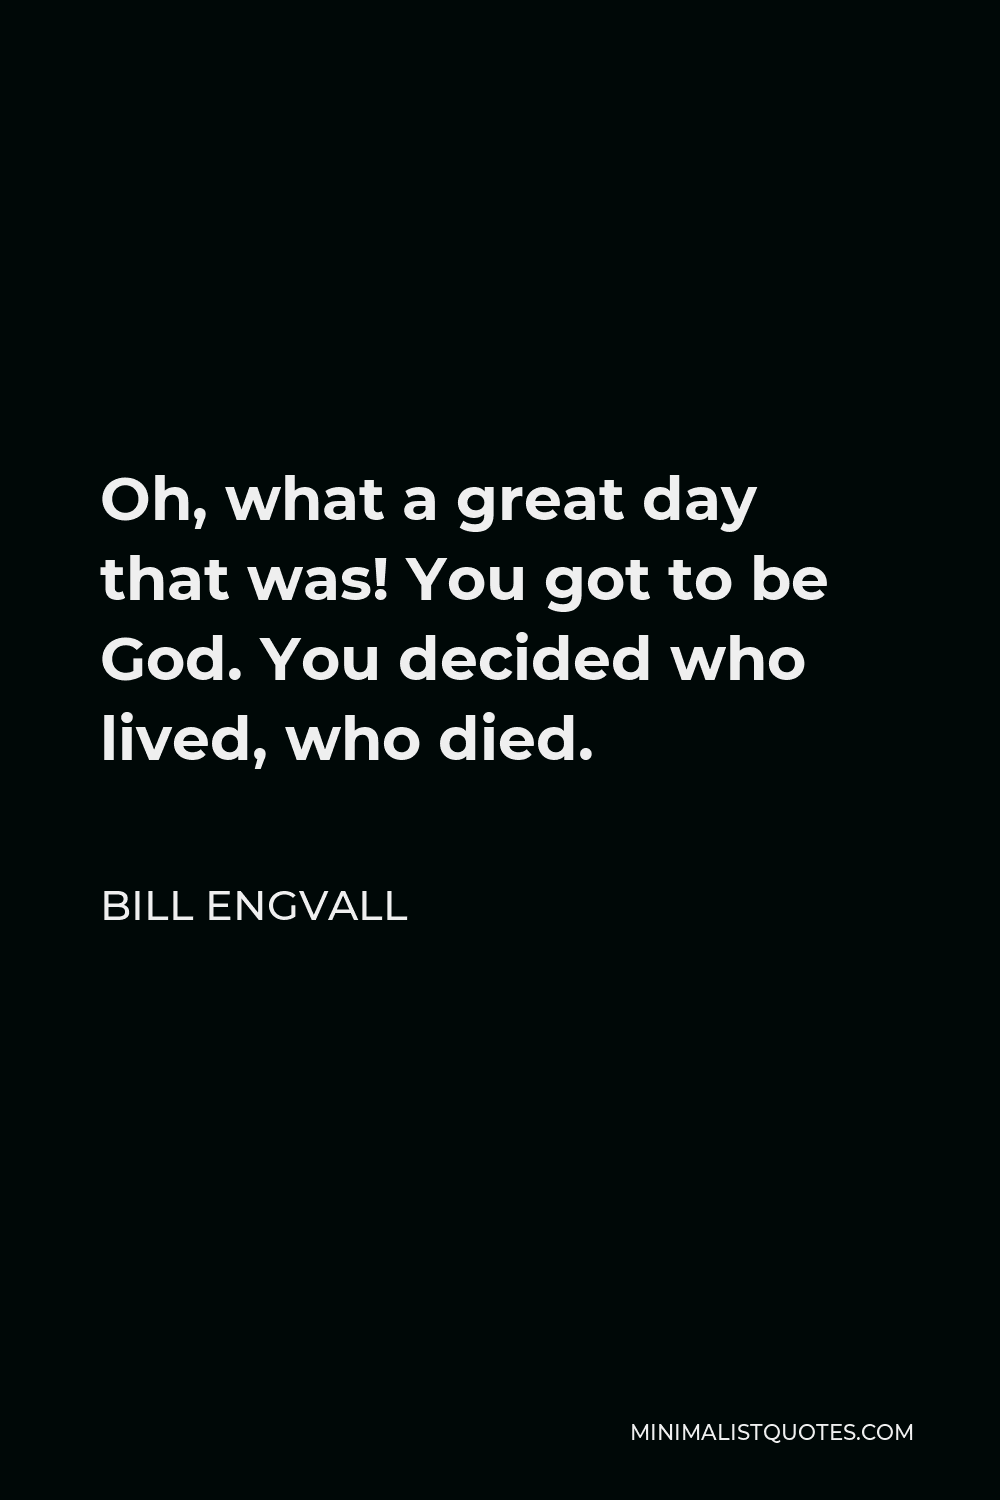 Bill Engvall Quote - Oh, what a great day that was! You got to be God. You decided who lived, who died.